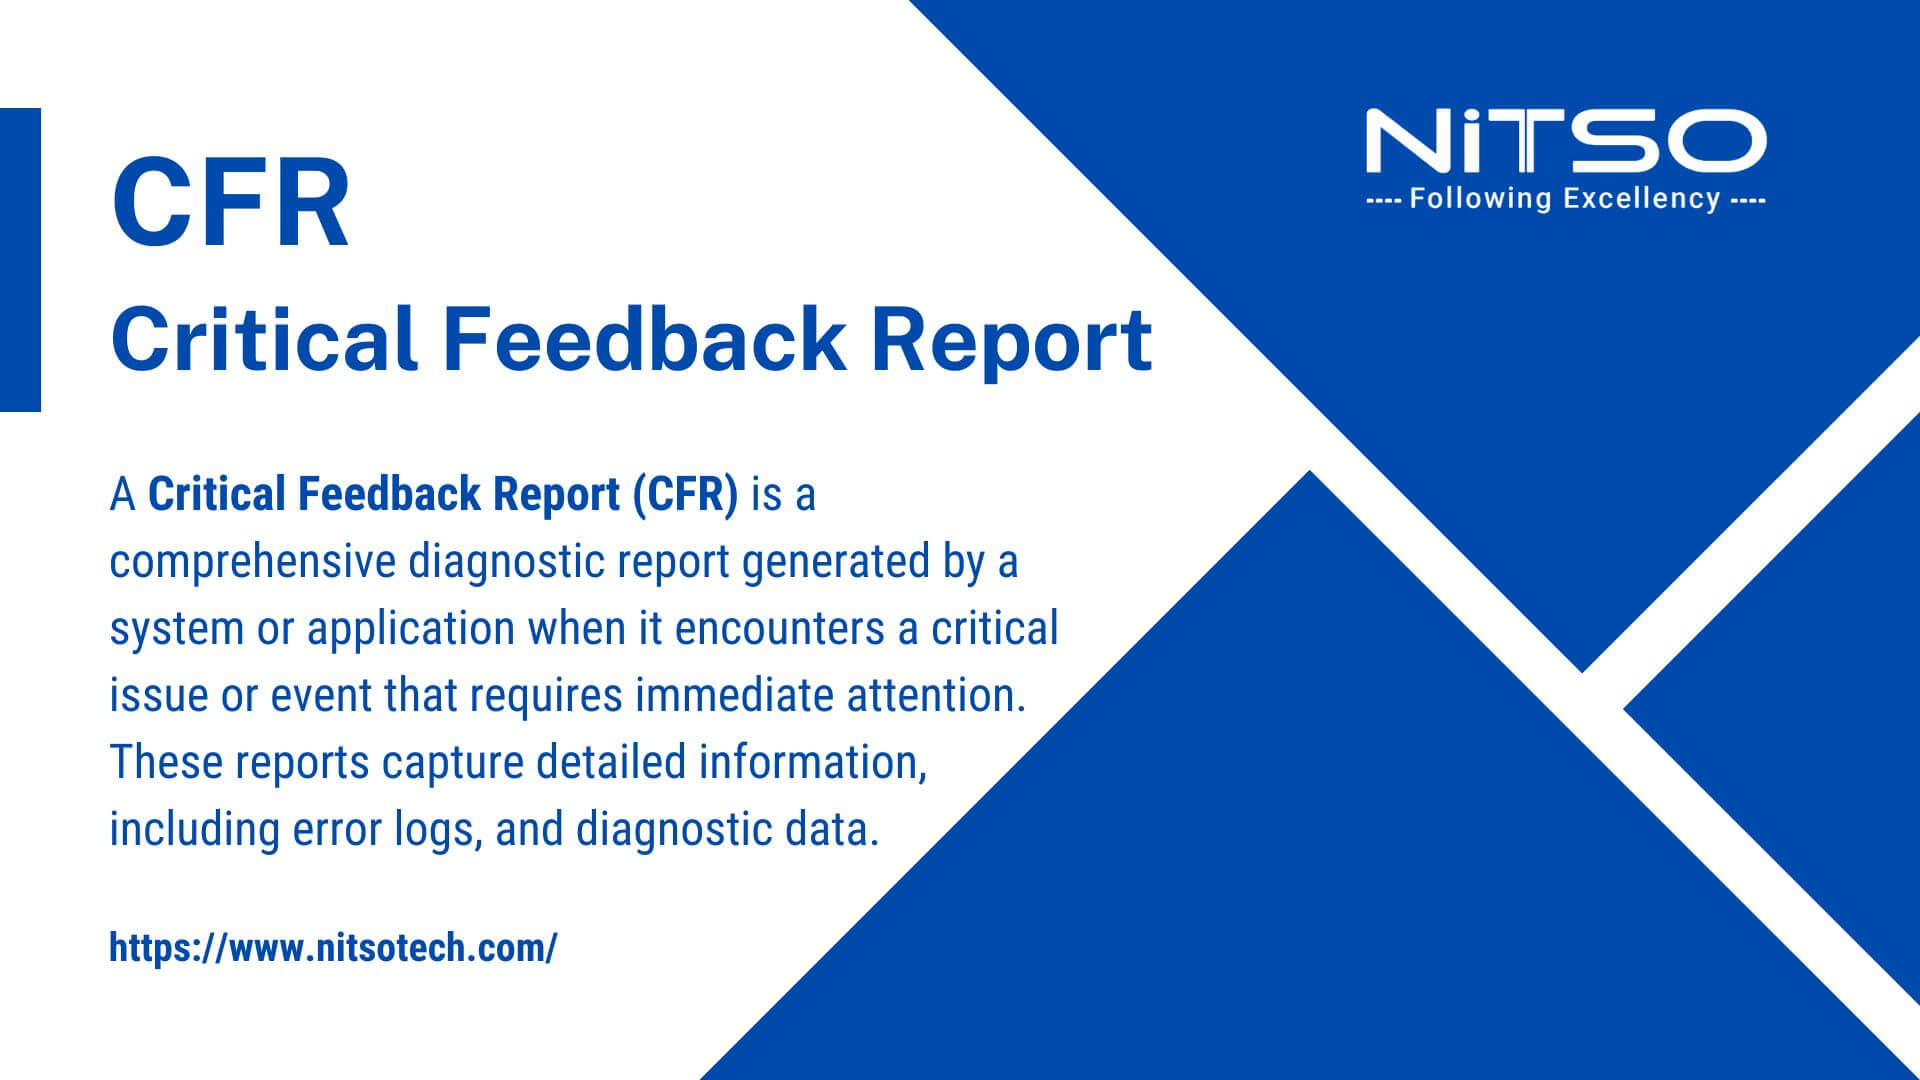 What is a Critical Feedback Report (CFR)?